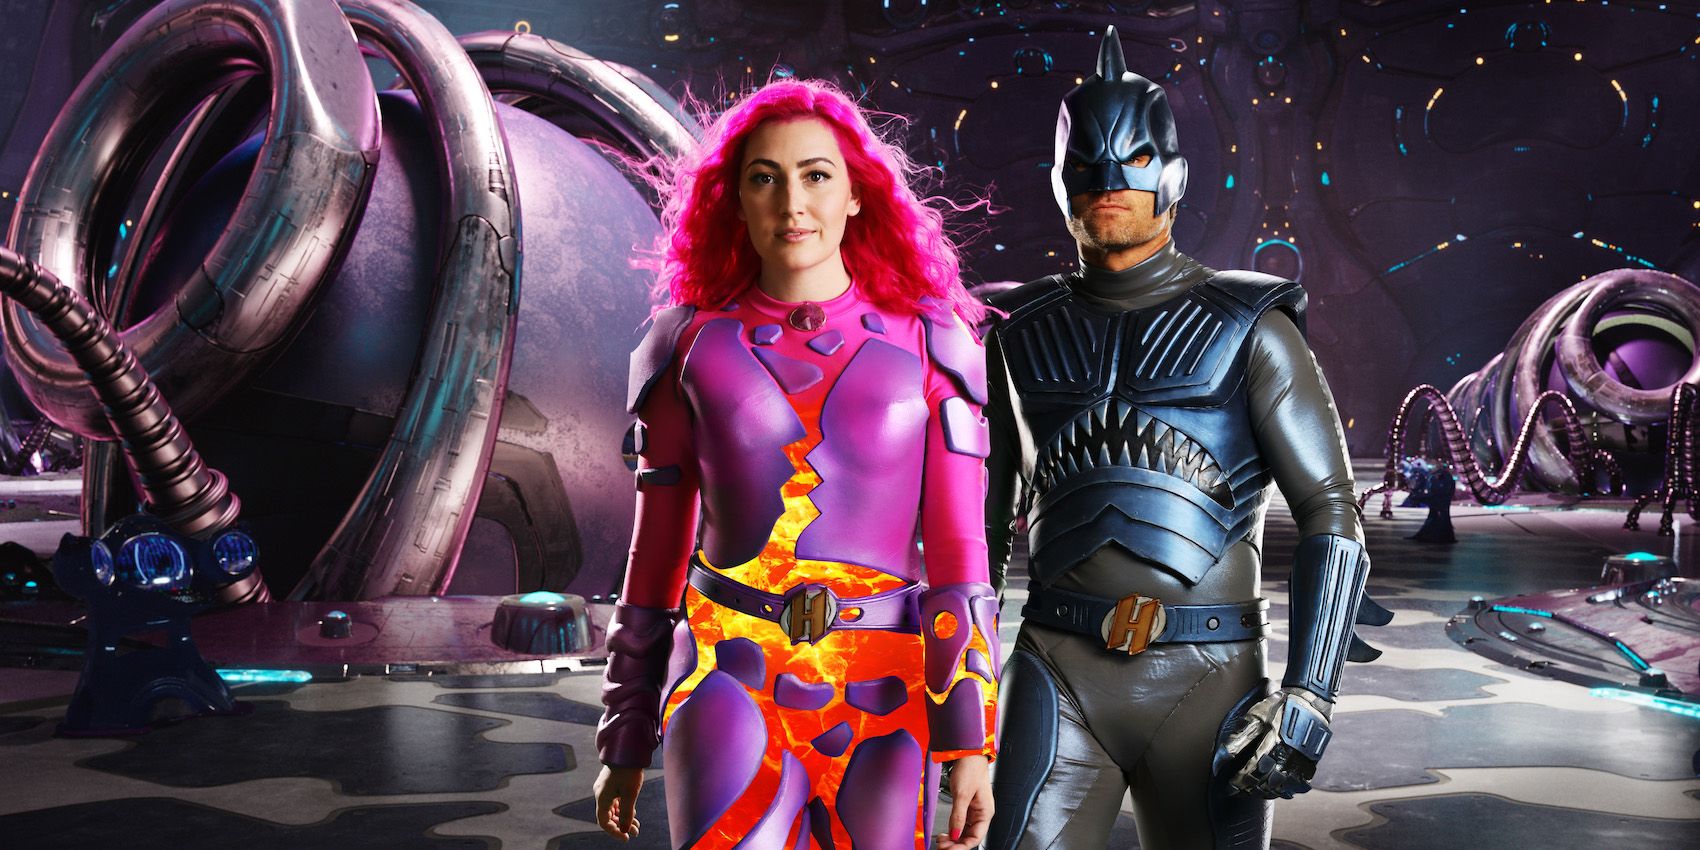 We Can Be Heroes: New Image Tease Return of Sharkboy and Lavagirl